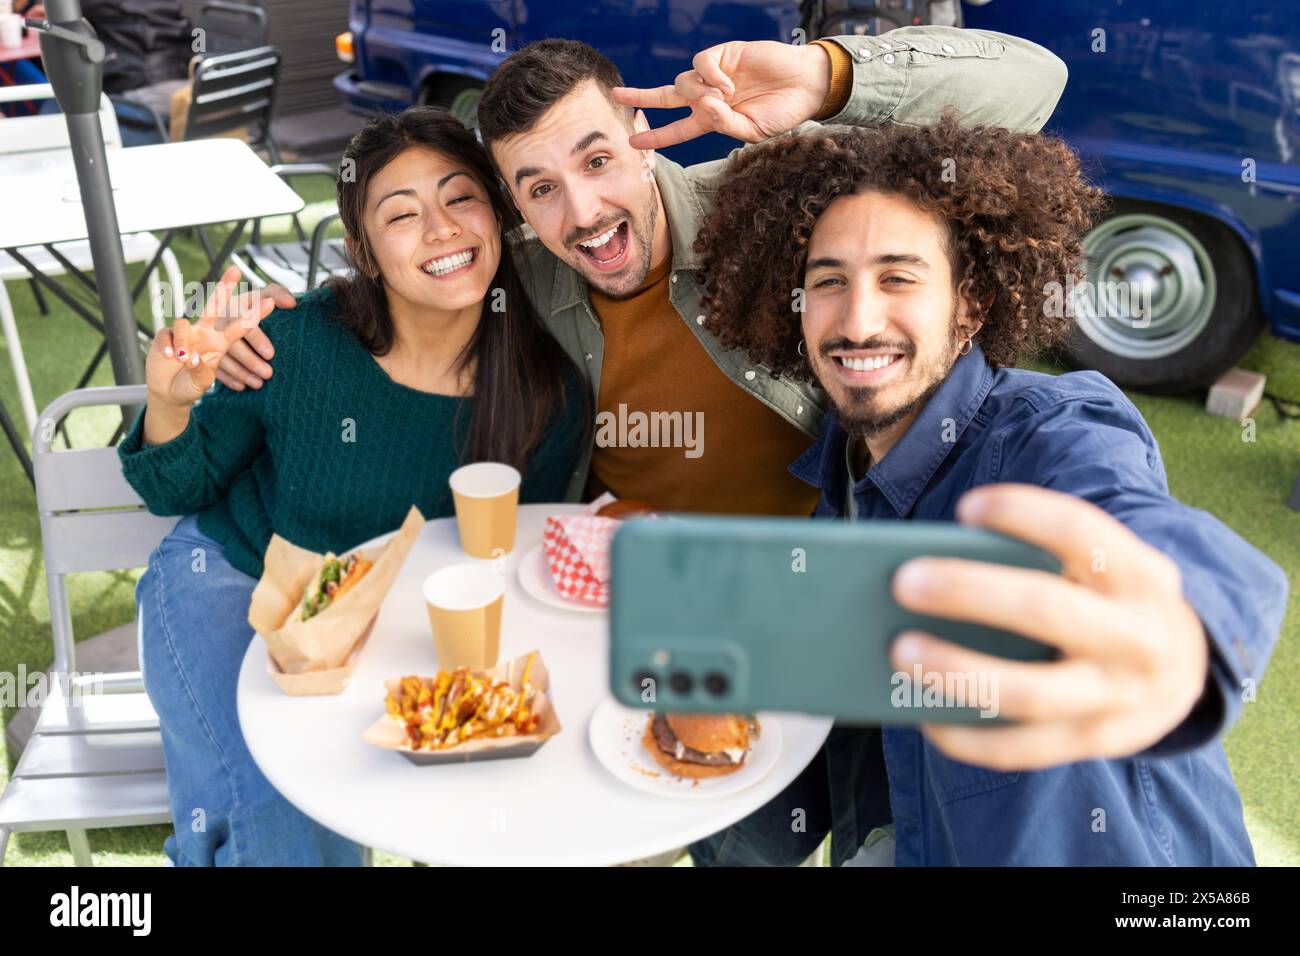 Three friends enjoy a meal from a food truck while taking a selfie, showcasing fun and friendship Stock Photo